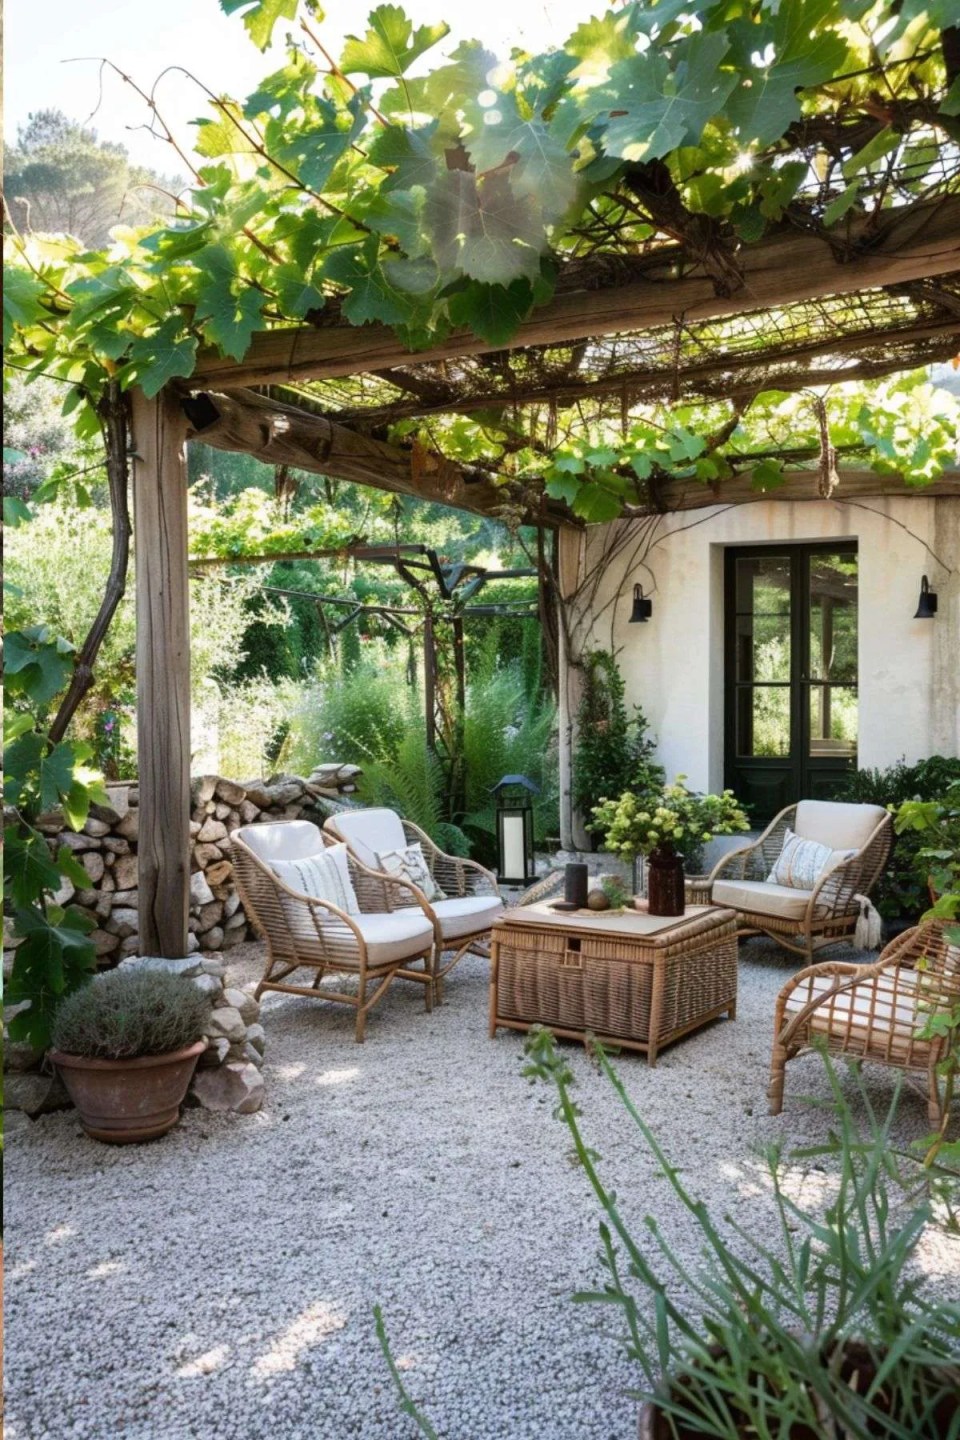 a pergola built on the side of a house with grapevines and rattan furniture